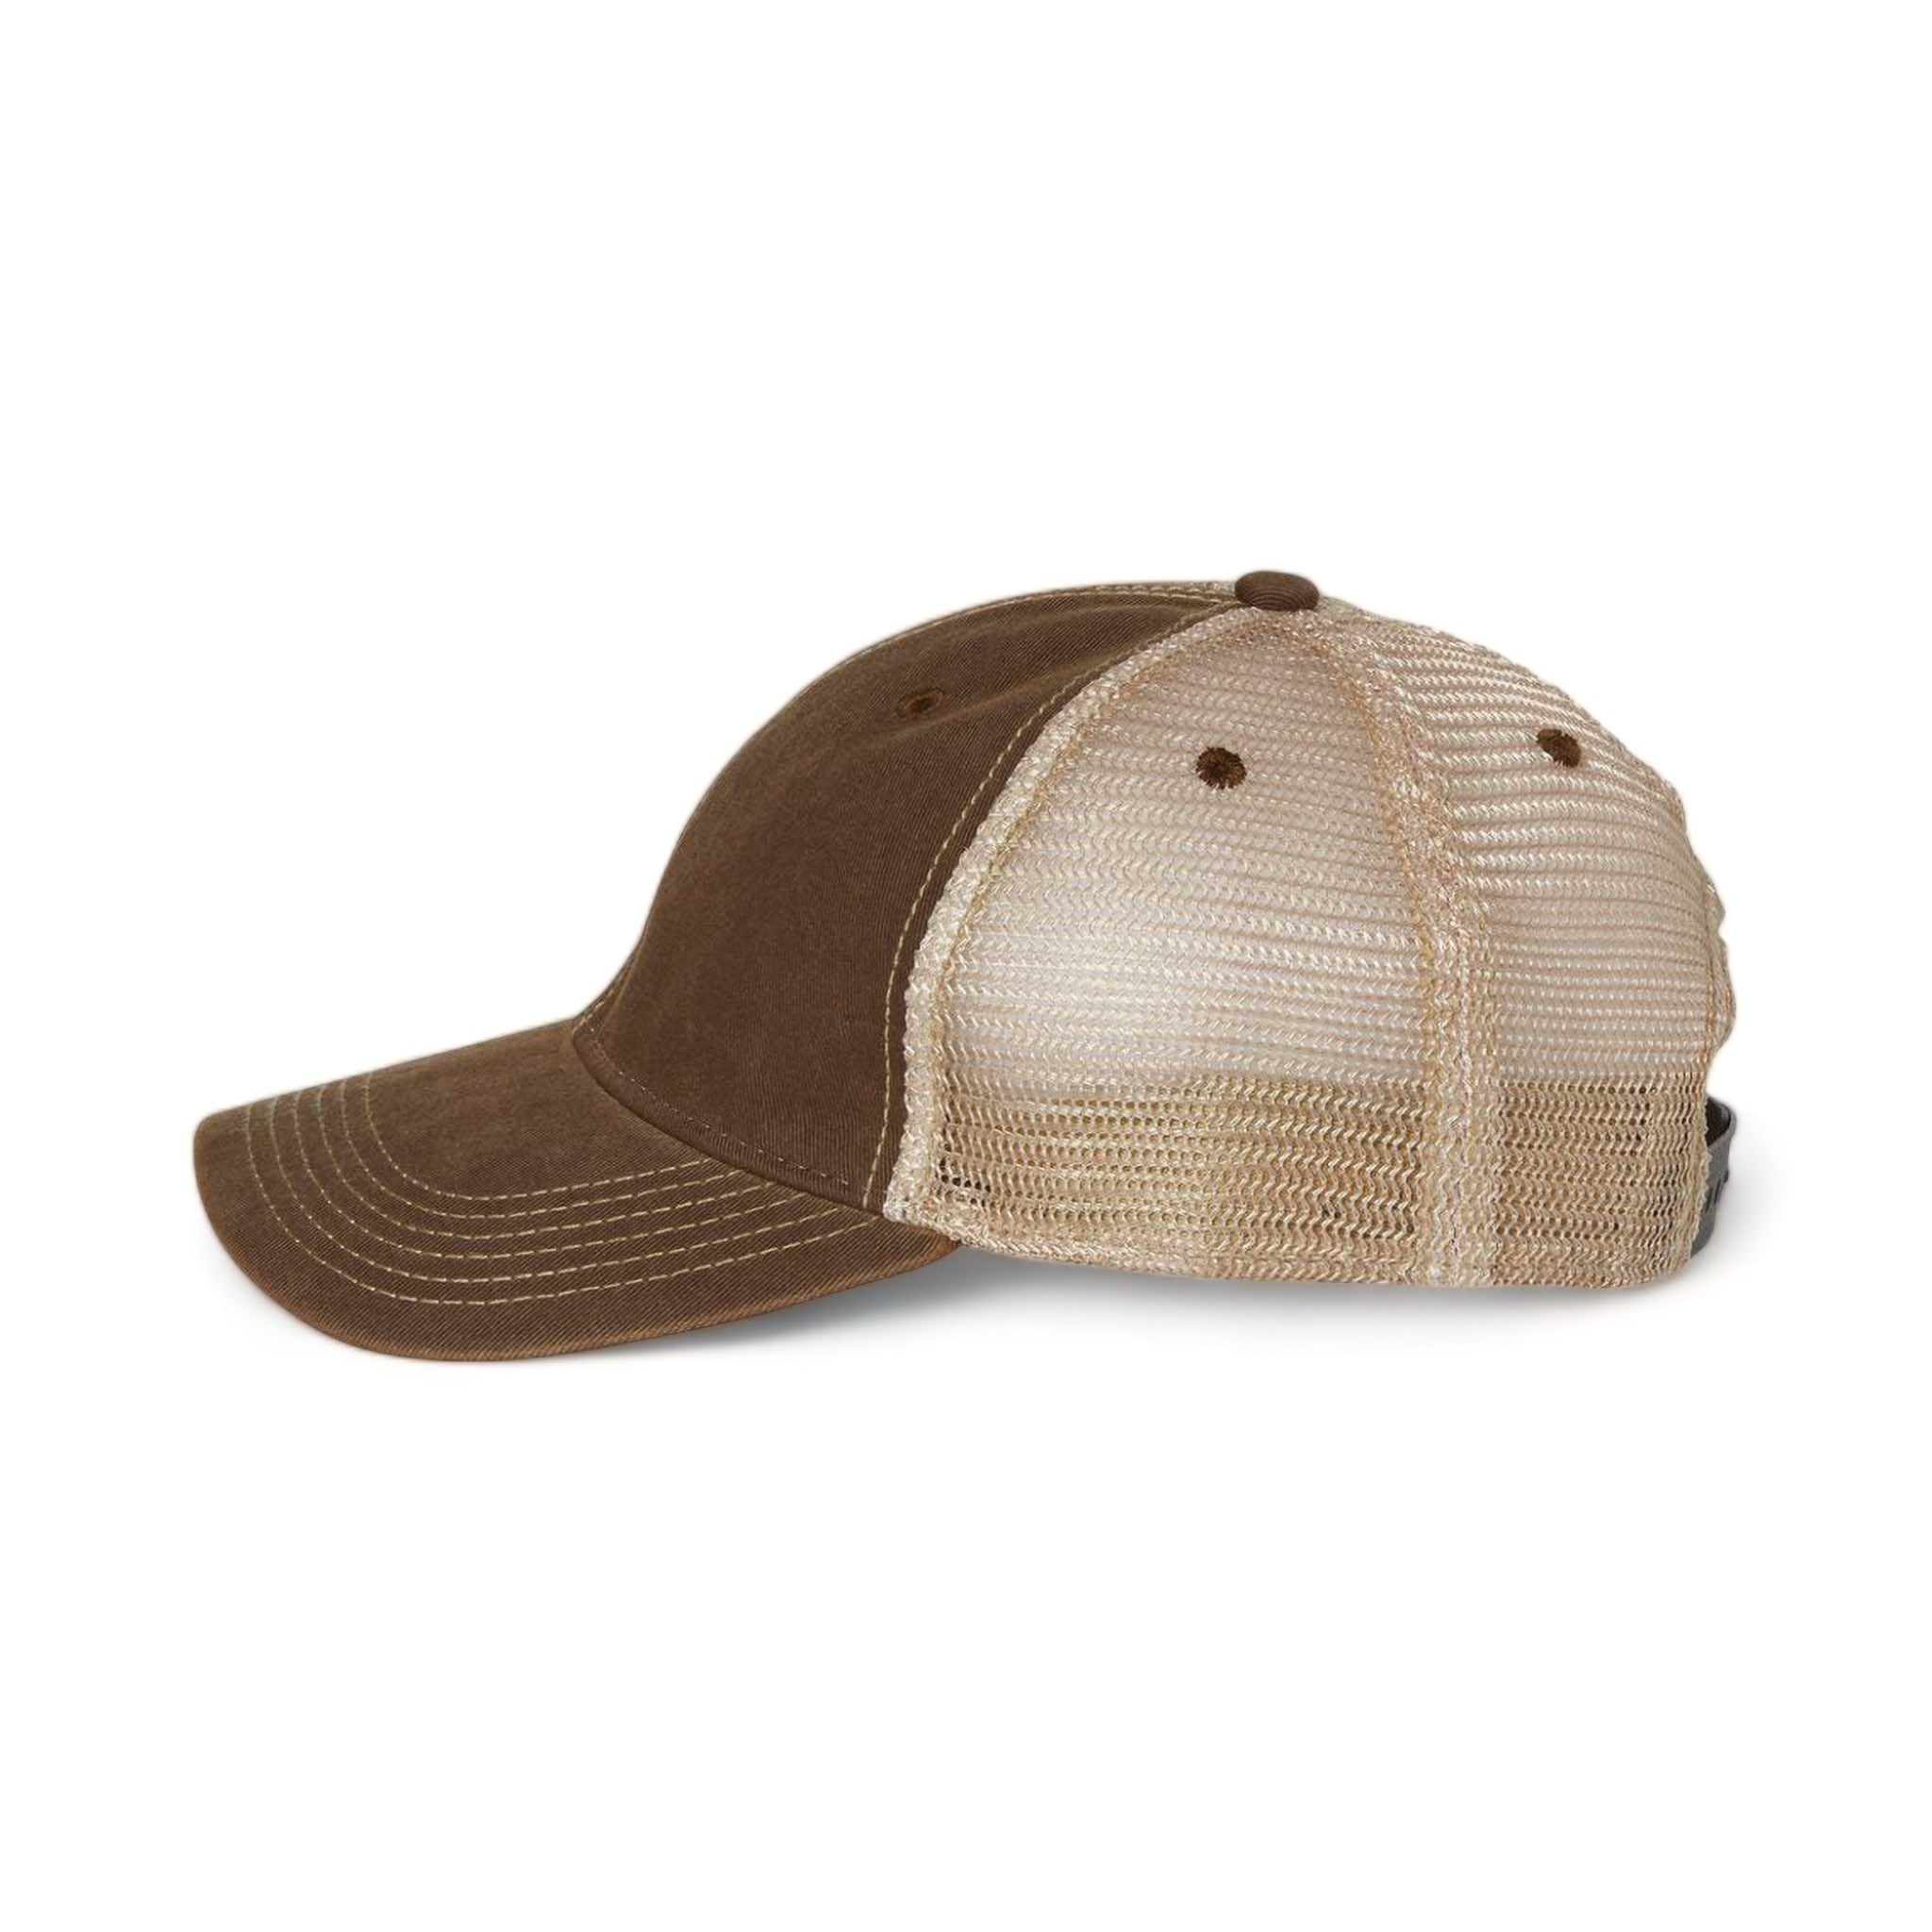 Side view of LEGACY OFA custom hat in brown and khaki